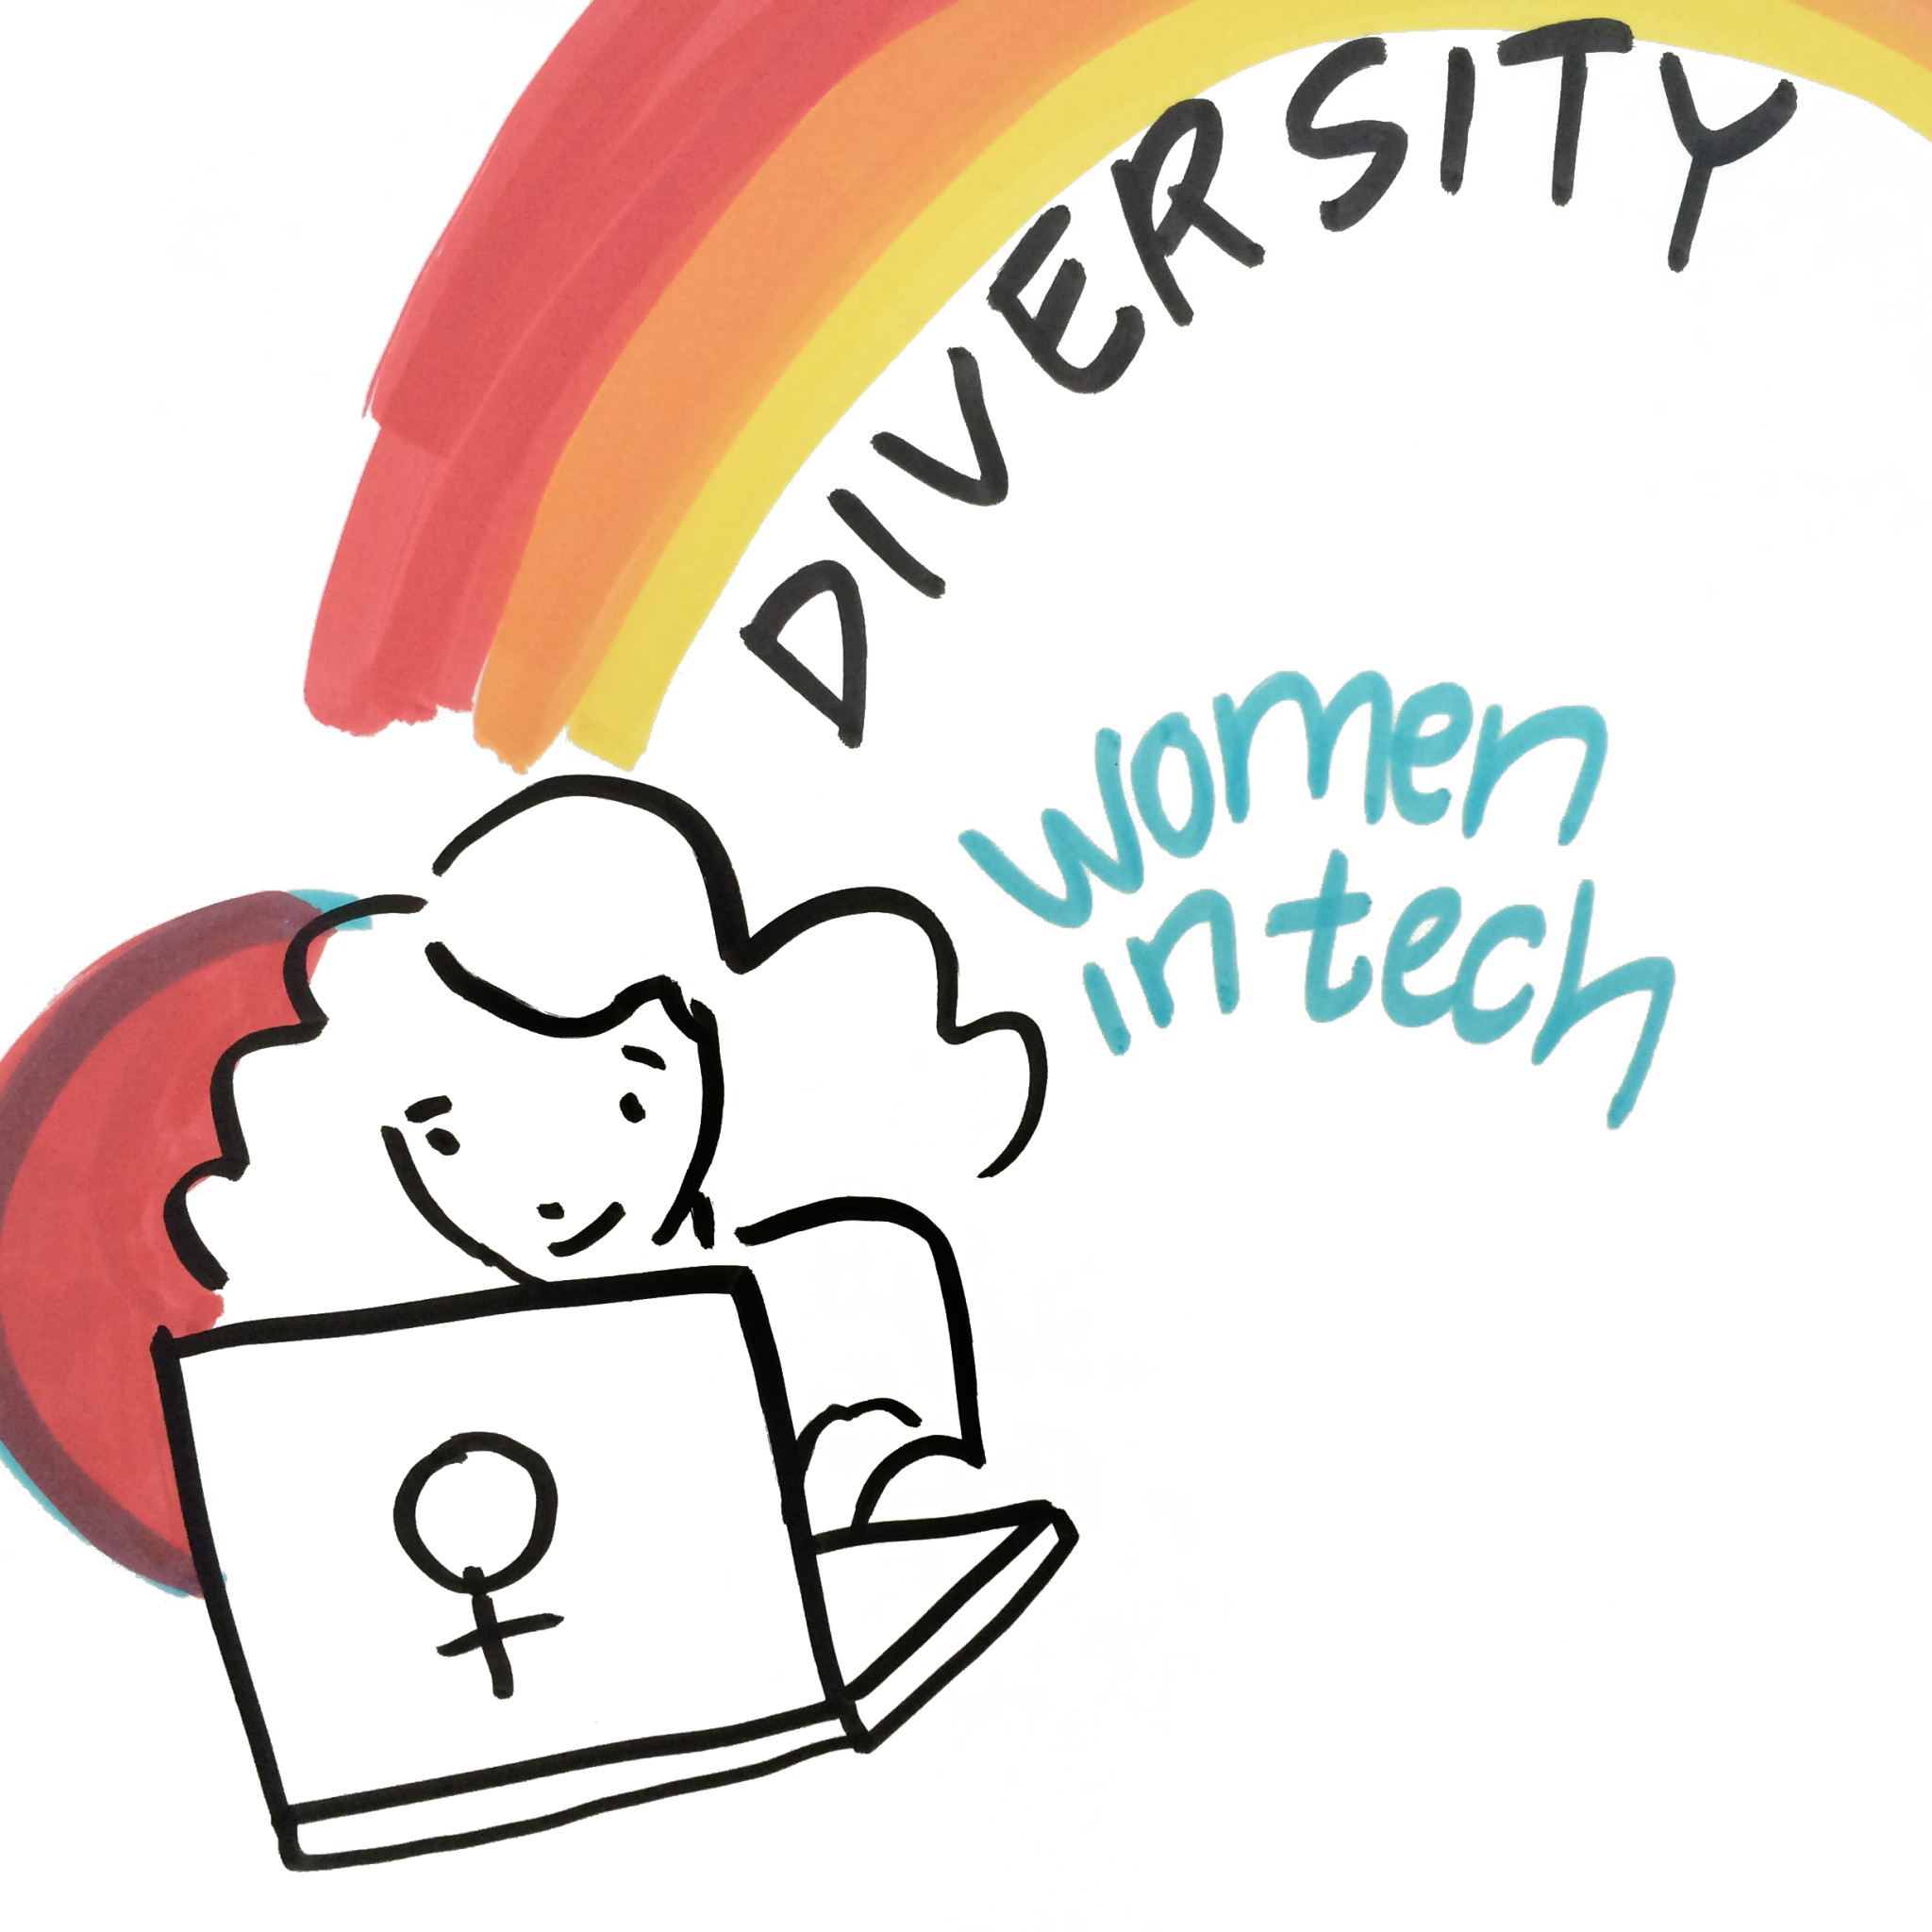 ImageThink graphic recorded sessions centered on diversity and women in tech.